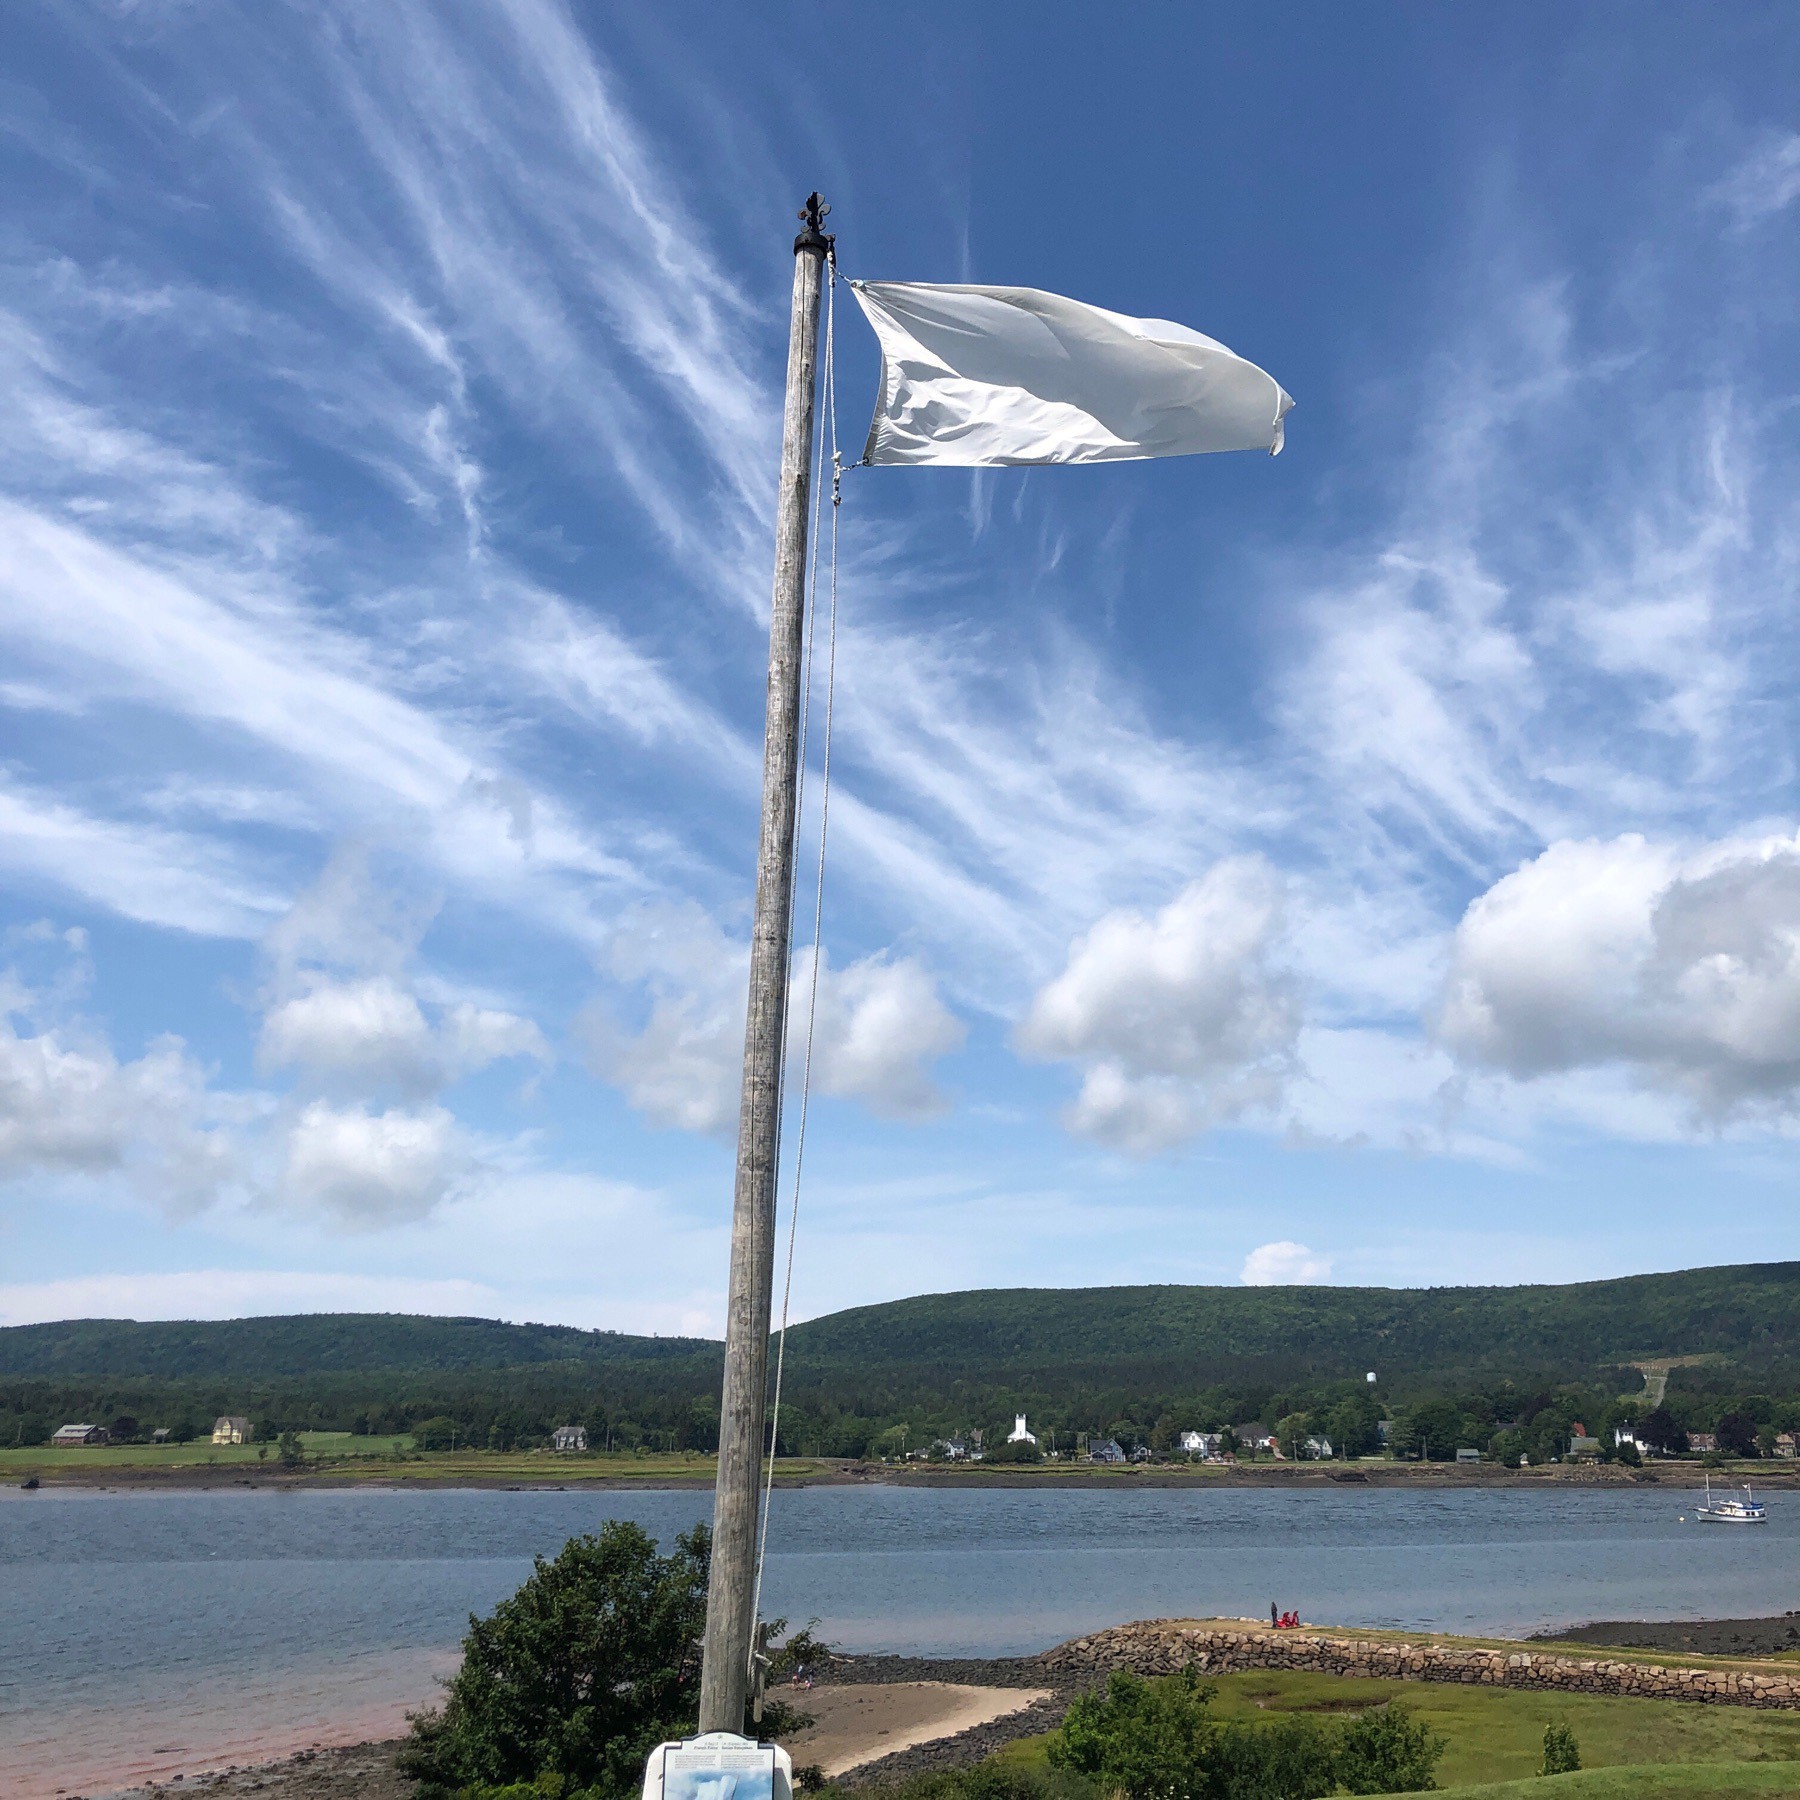 White flag against clouds in sky.